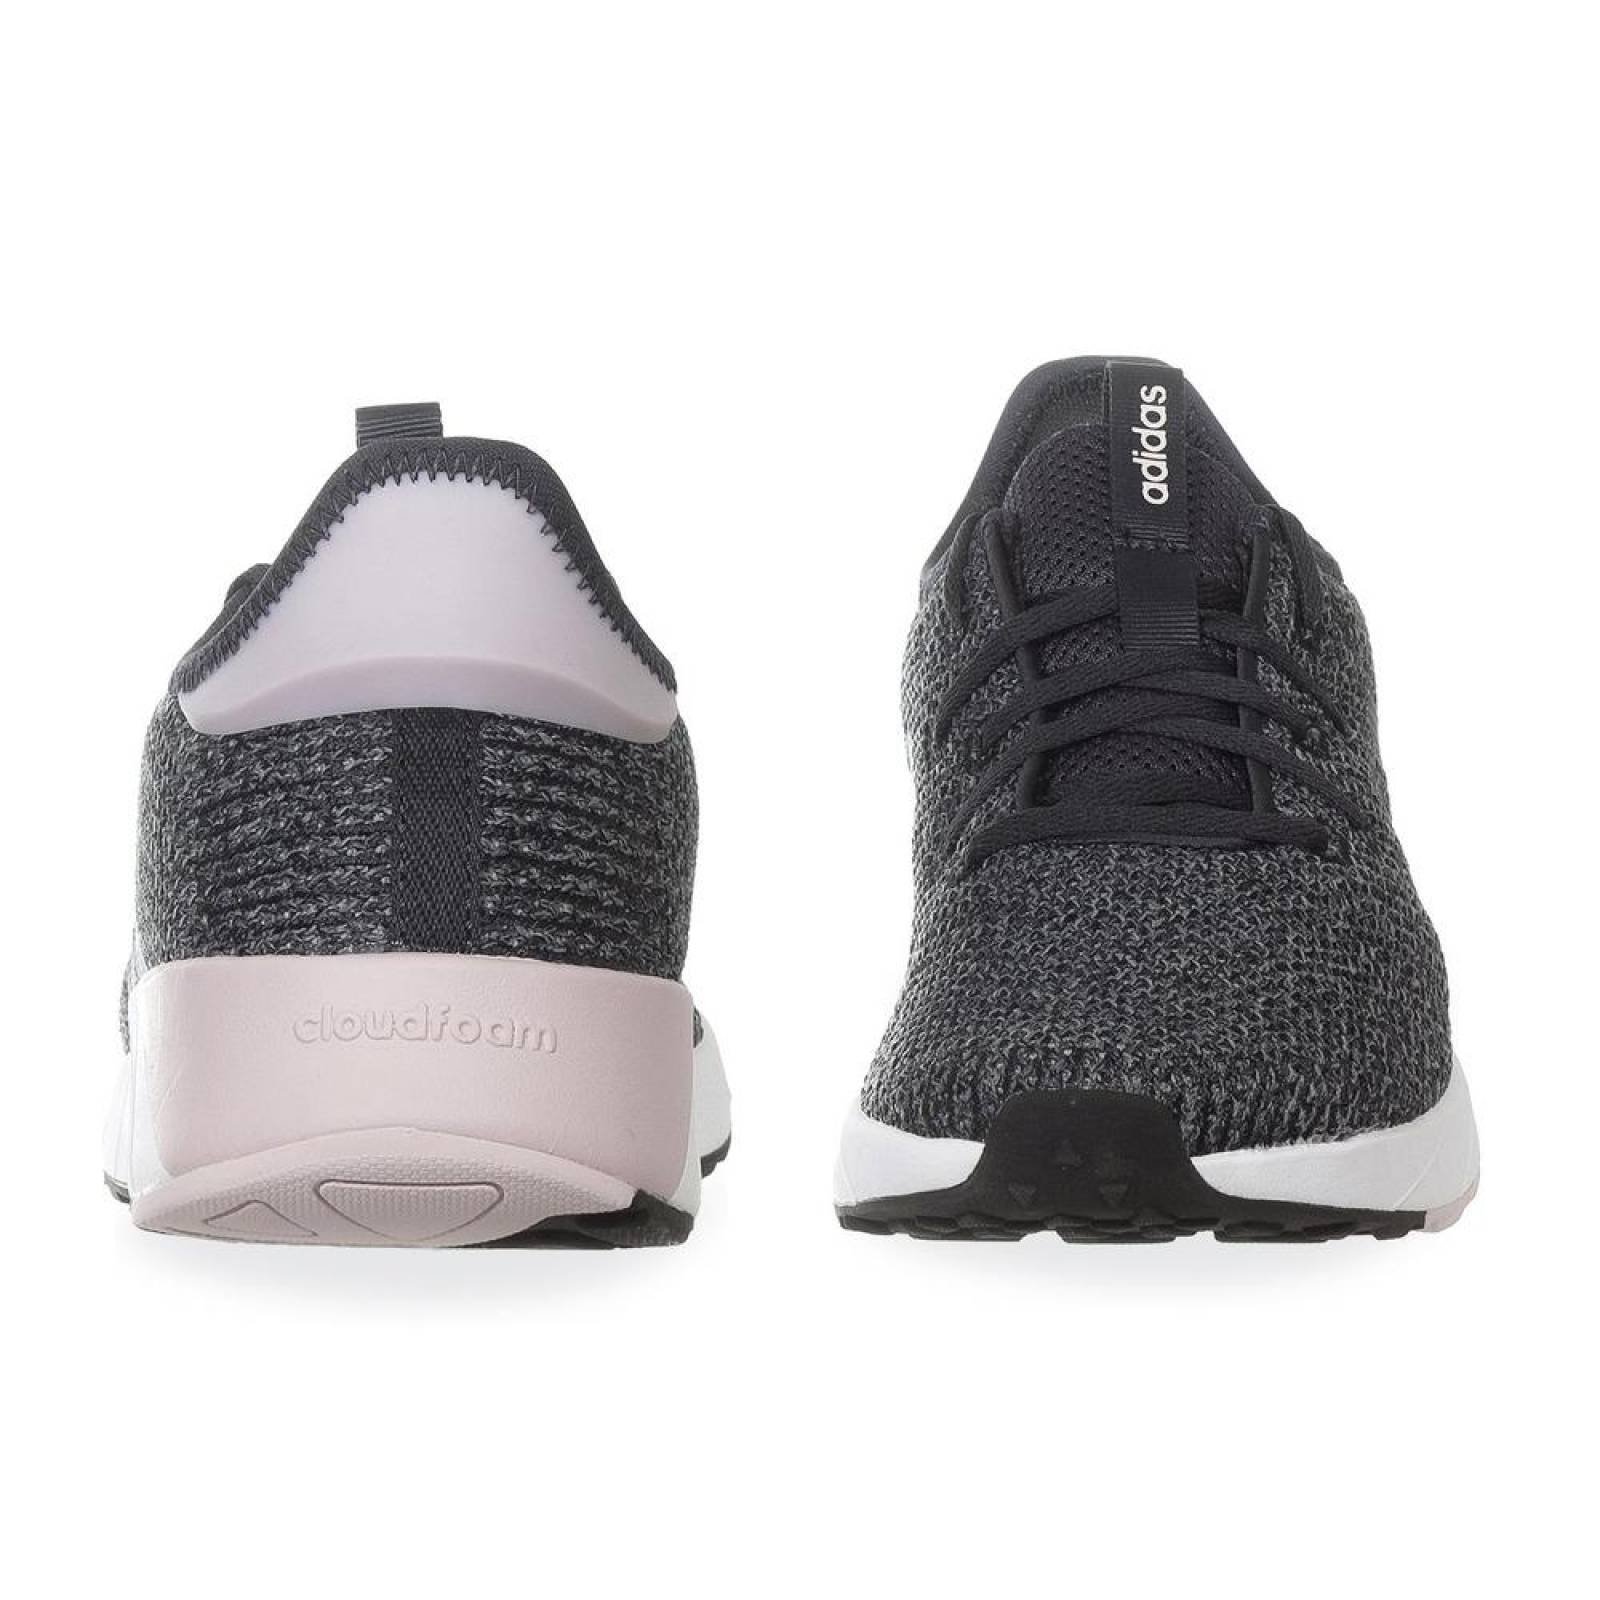 Tenis Adidas Questar X BYD B96490 Gris Obscuro Mujer 